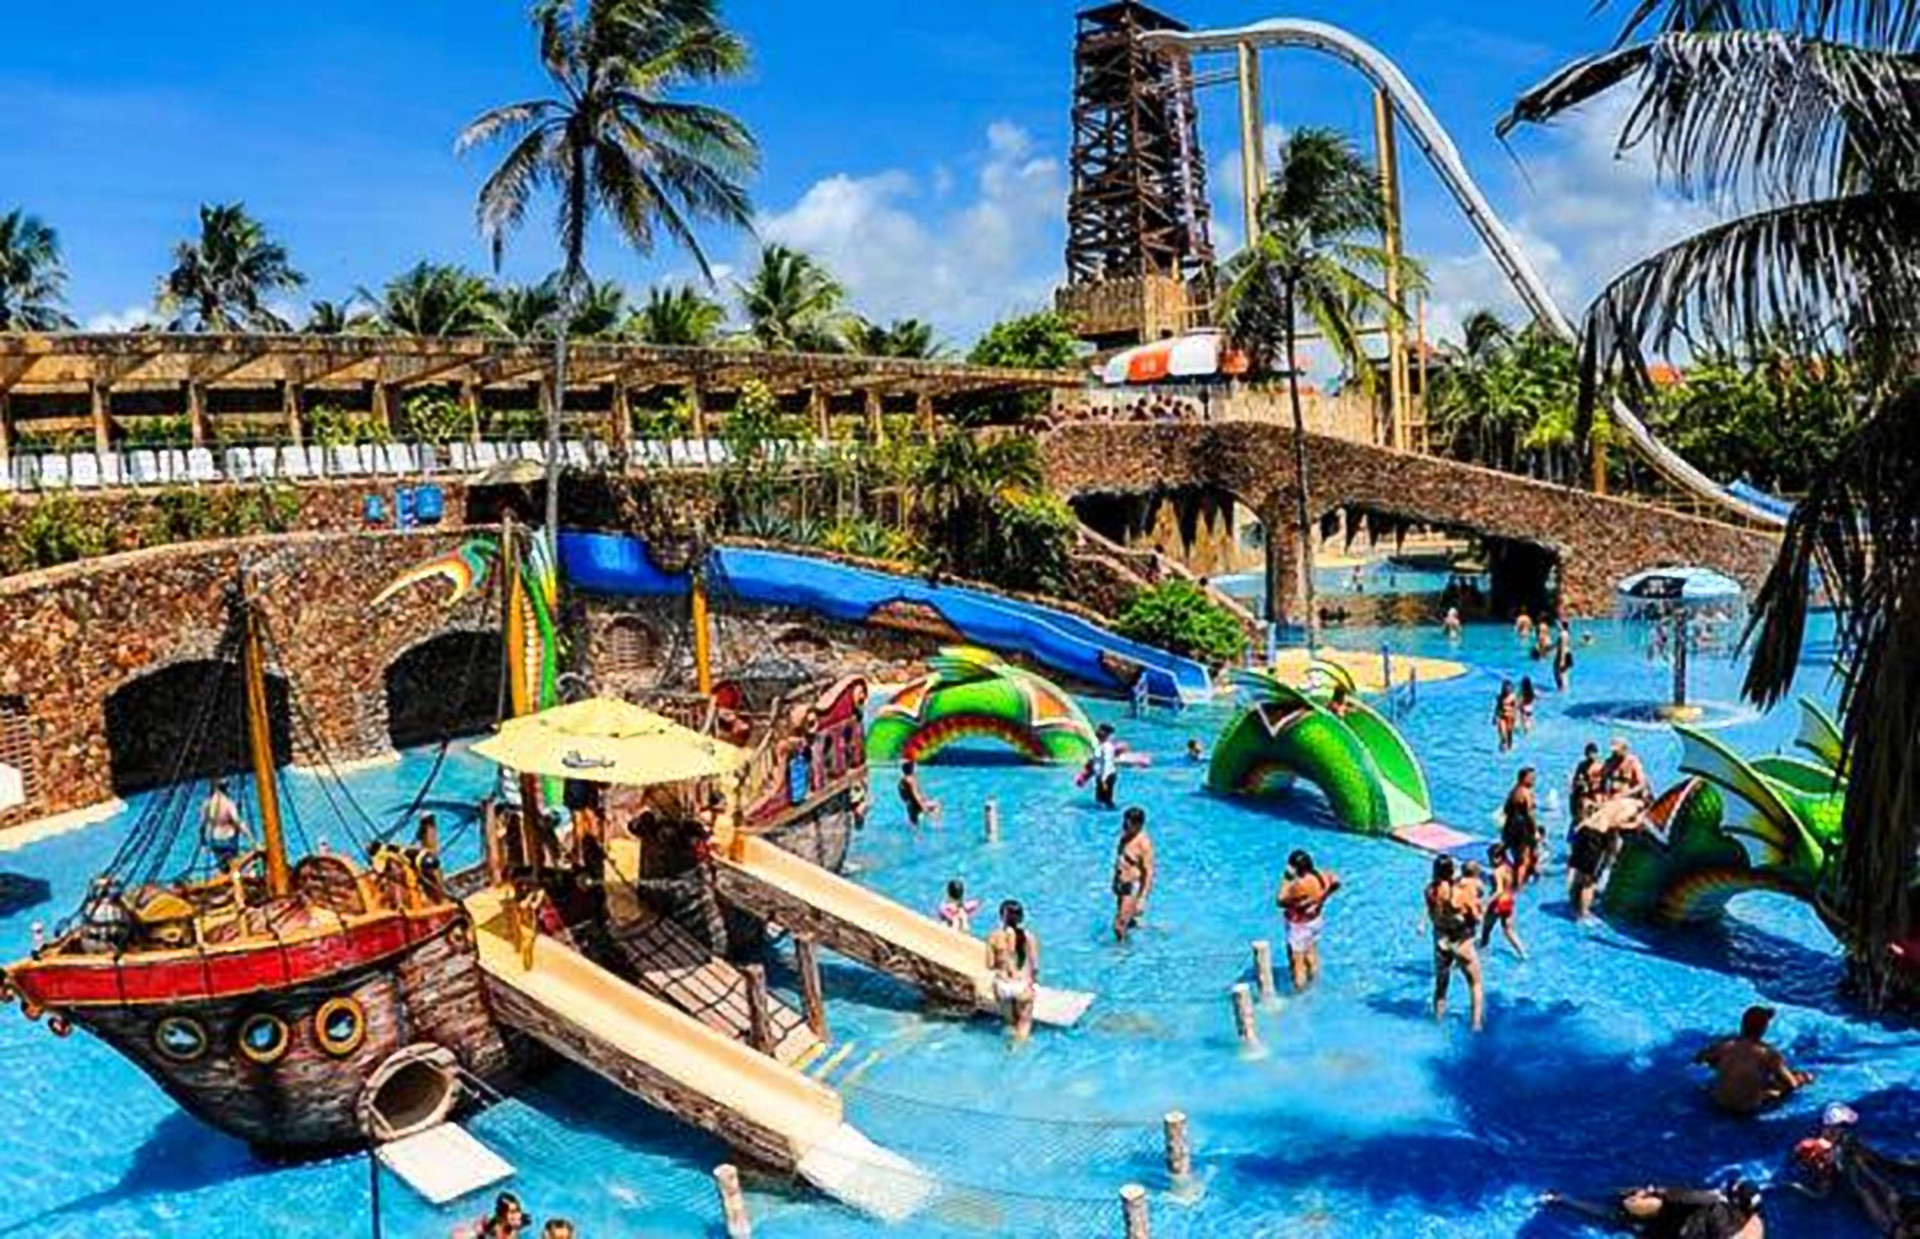 Brazil's most famous water park is located in Fortaleza. It opened around 30 years ago with only three water slides, but these days it has loads of rides spread throughout an area of 20 thousand square feet.